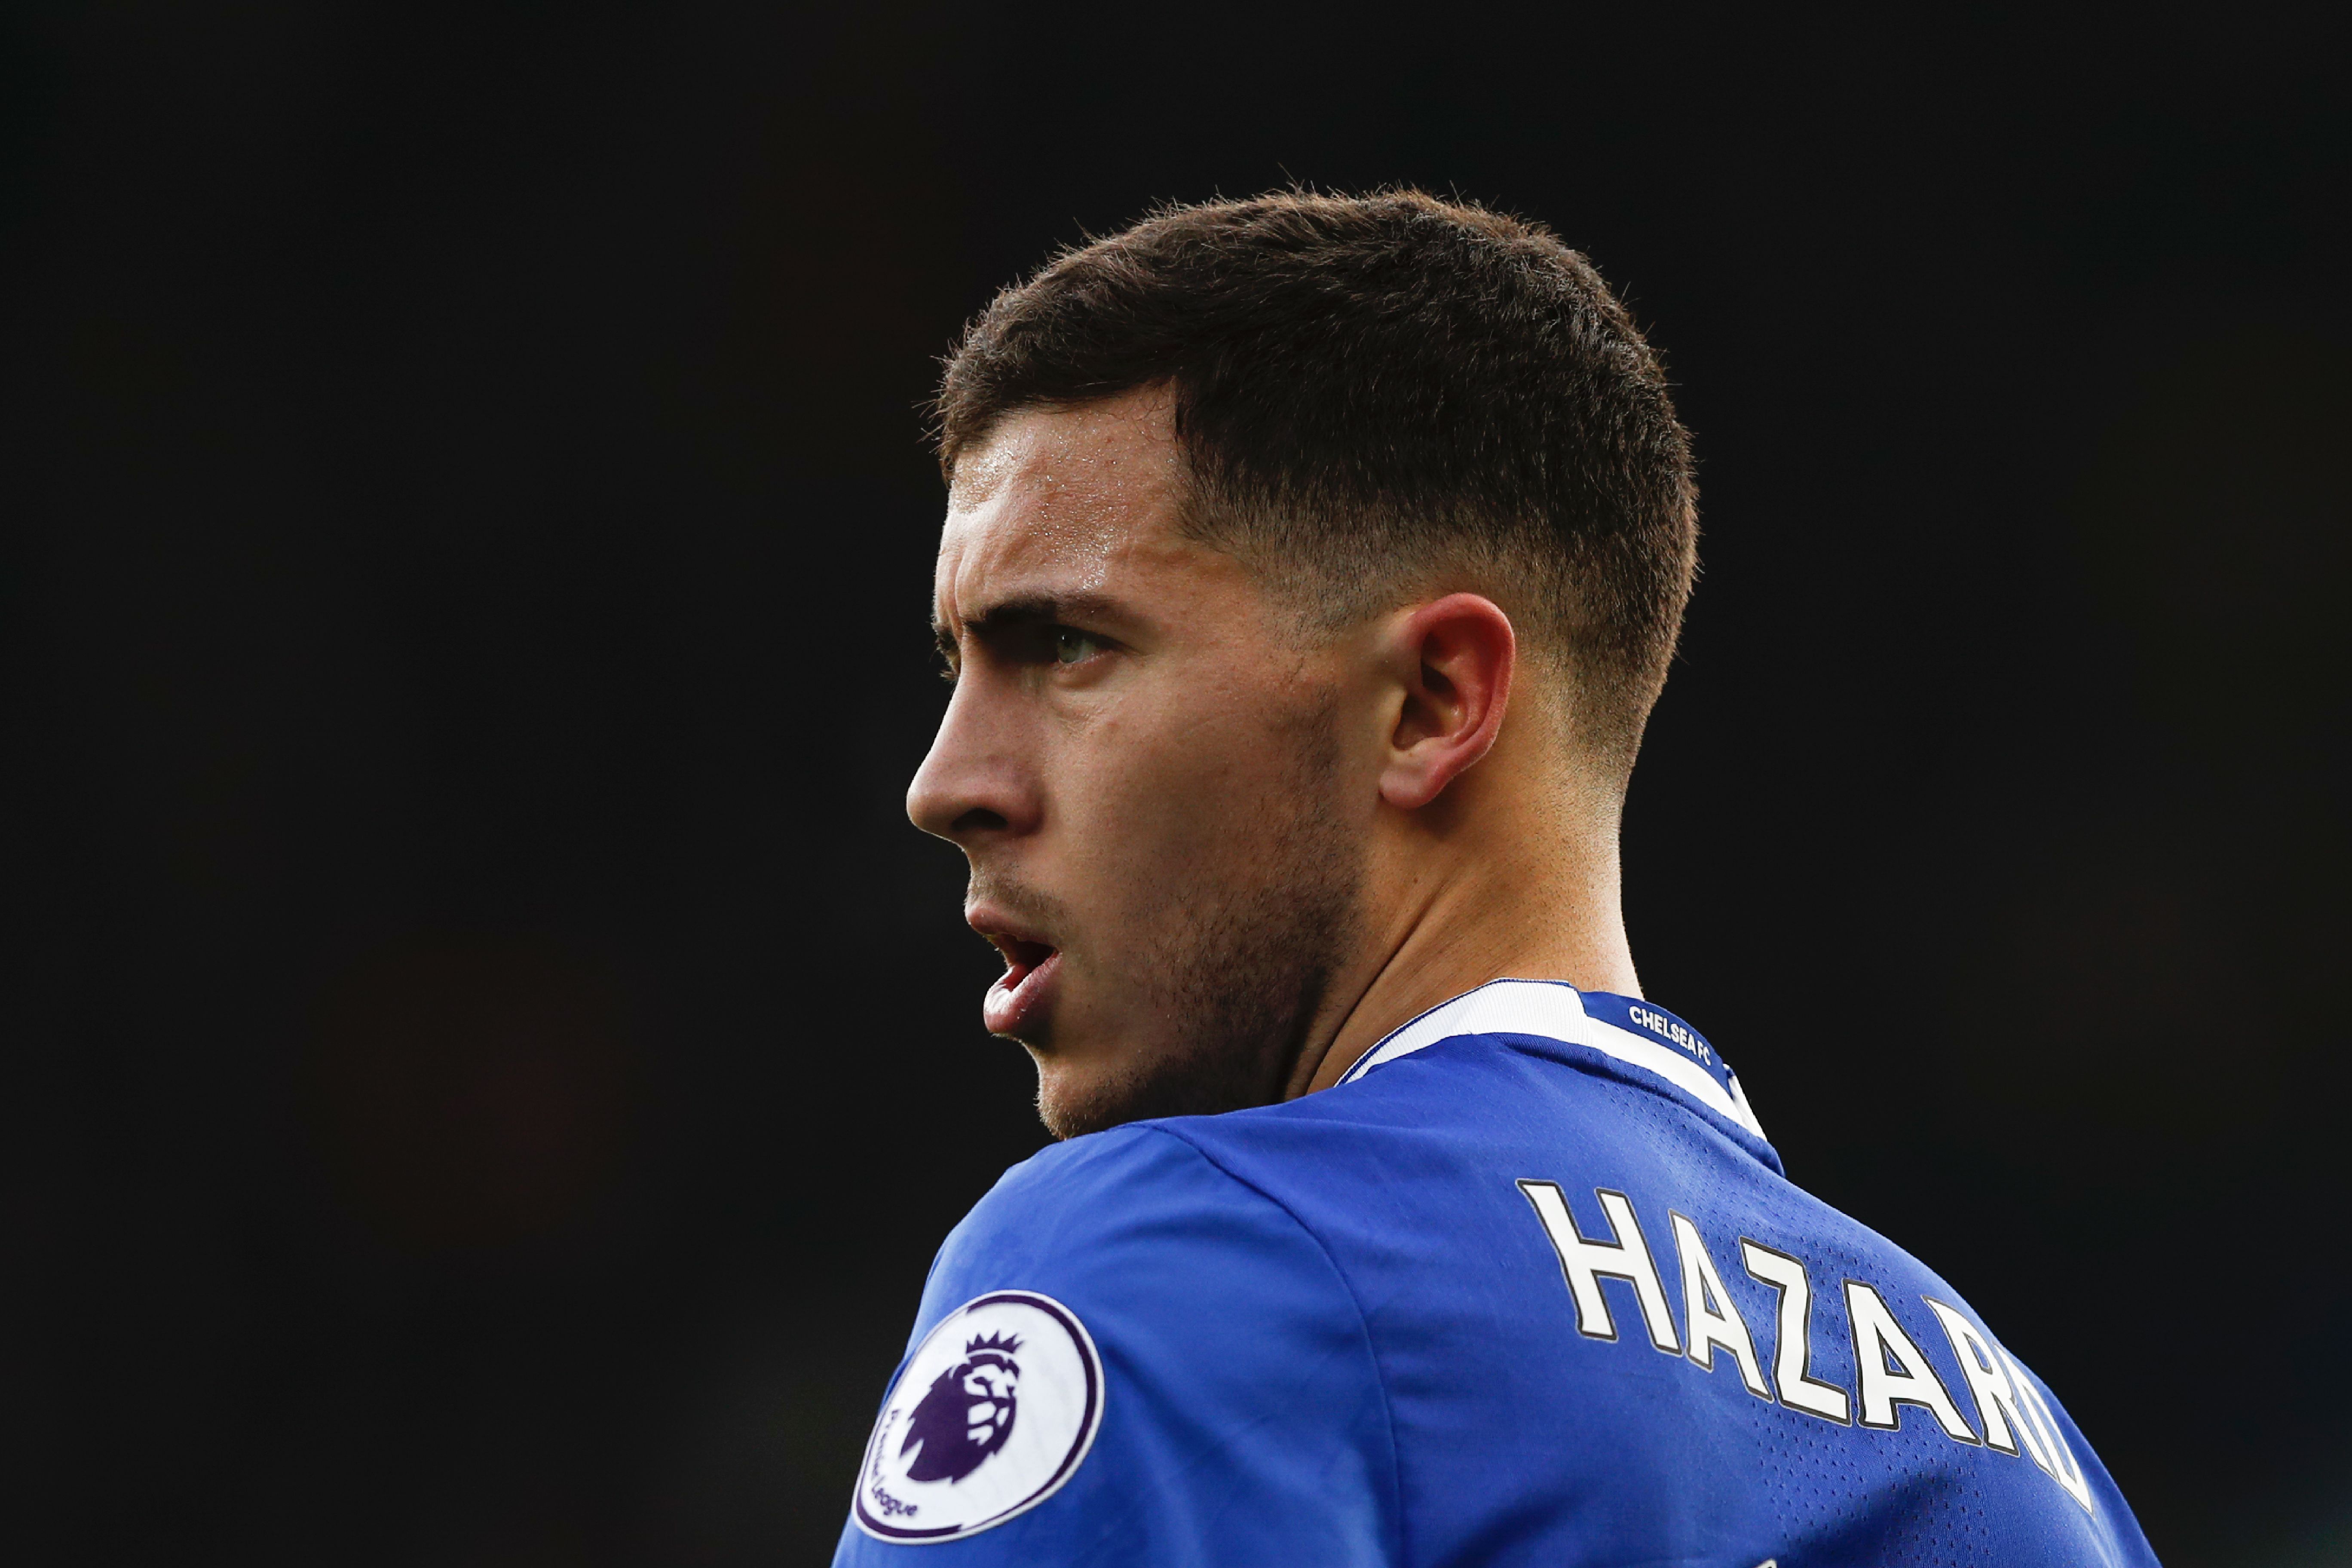 Chelsea's Belgian midfielder Eden Hazard plays during the English Premier League football match between Chelsea and Arsenal at Stamford Bridge in London on February 4, 2017. / AFP / Adrian DENNIS / RESTRICTED TO EDITORIAL USE. No use with unauthorized audio, video, data, fixture lists, club/league logos or 'live' services. Online in-match use limited to 75 images, no video emulation. No use in betting, games or single club/league/player publications.  /         (Photo credit should read ADRIAN DENNIS/AFP/Getty Images)